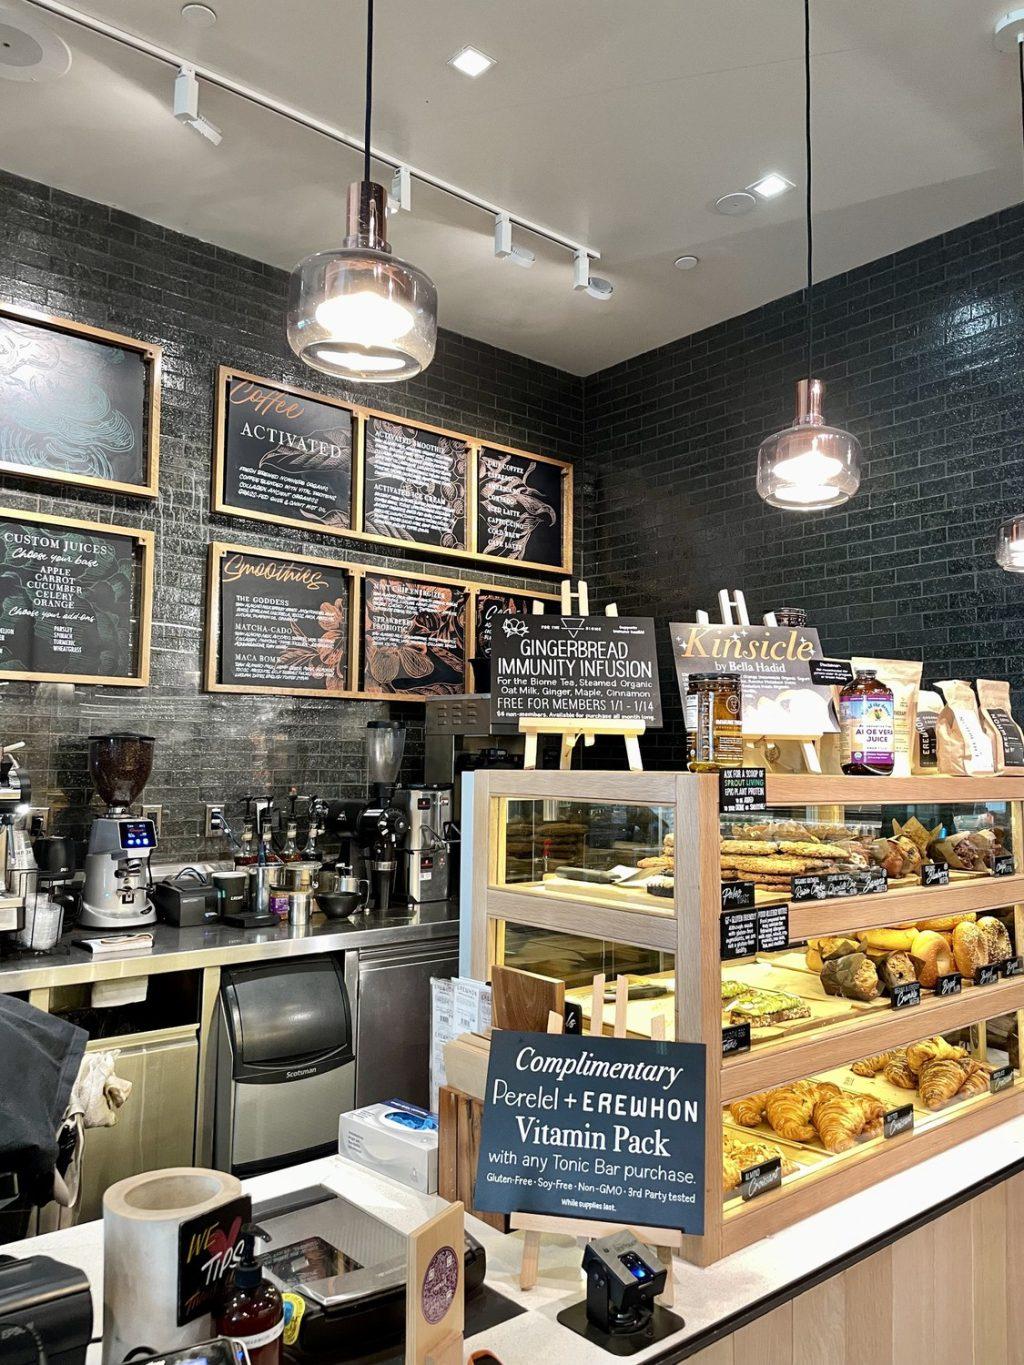 The Erewhon tonic bar is pictured featuring customizable smoothies and juices, smoothie bowls, coffee and freshly-baked pastries. With an Erewhon membership, customers were able to receive discounts on tonic bar purchases and other exclusive offers.